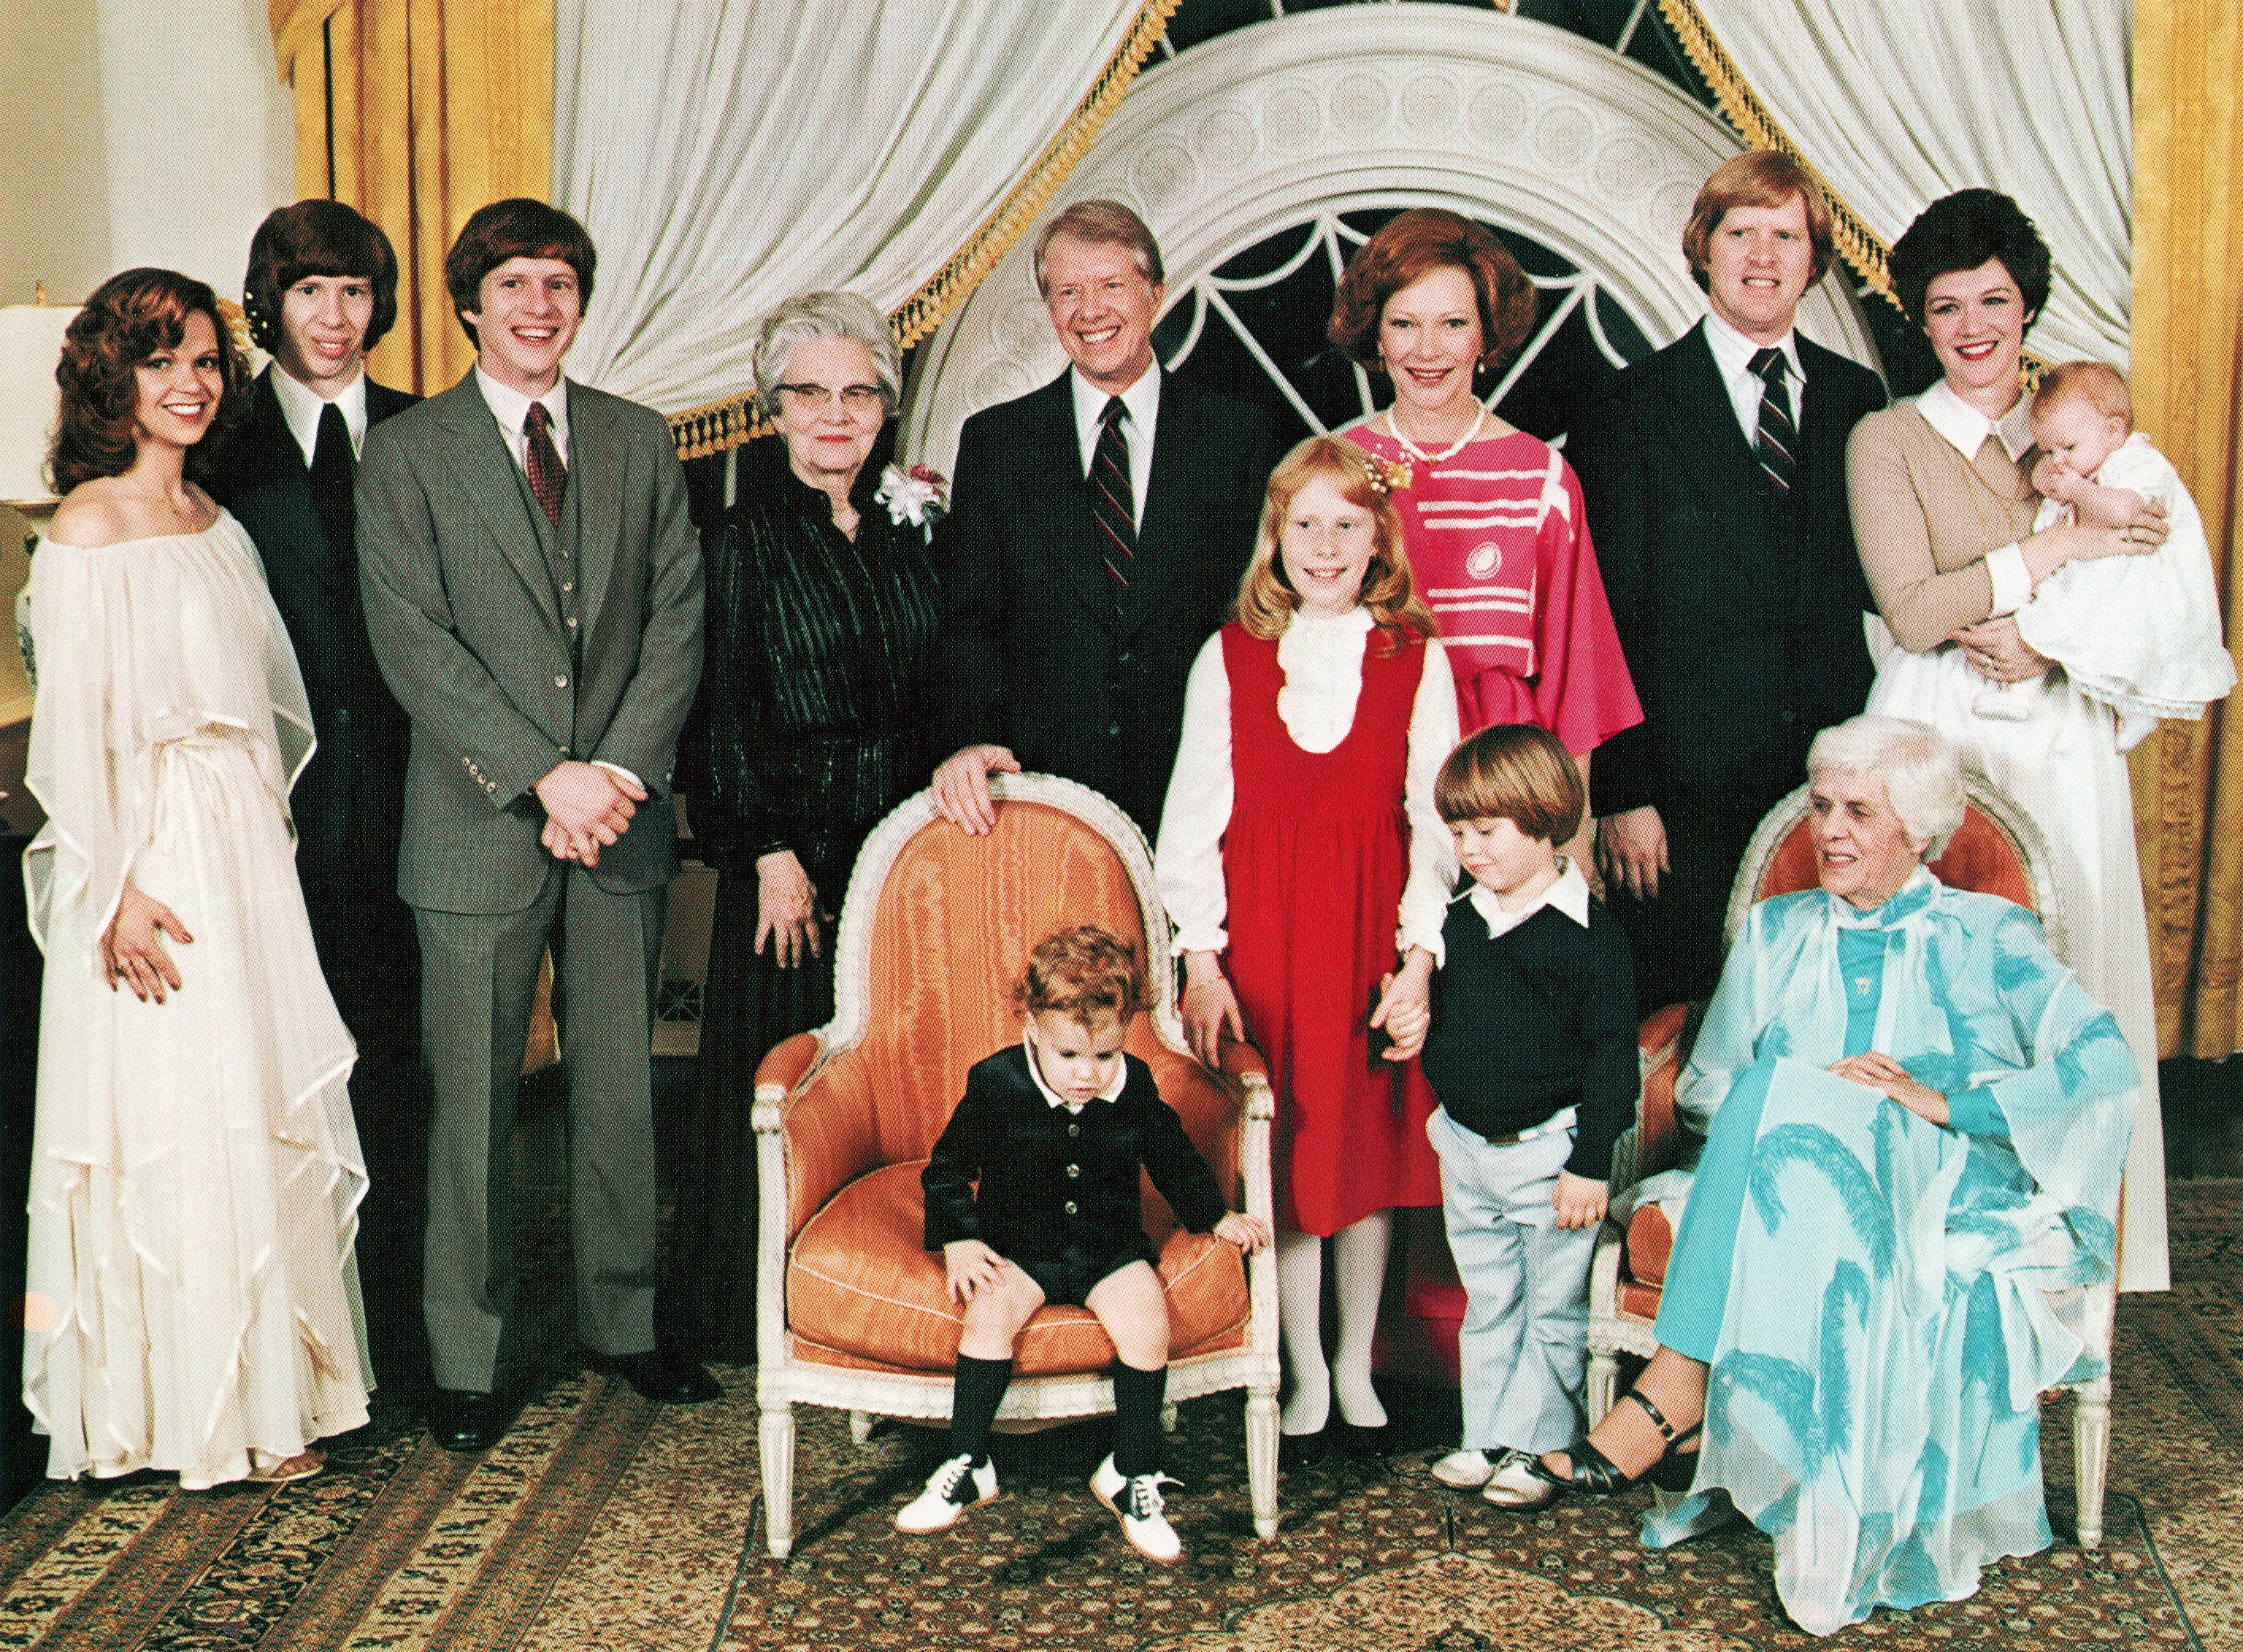 Former President of the United States, Jimmy Carter and his extended family in 1977 | Source: Getty Images